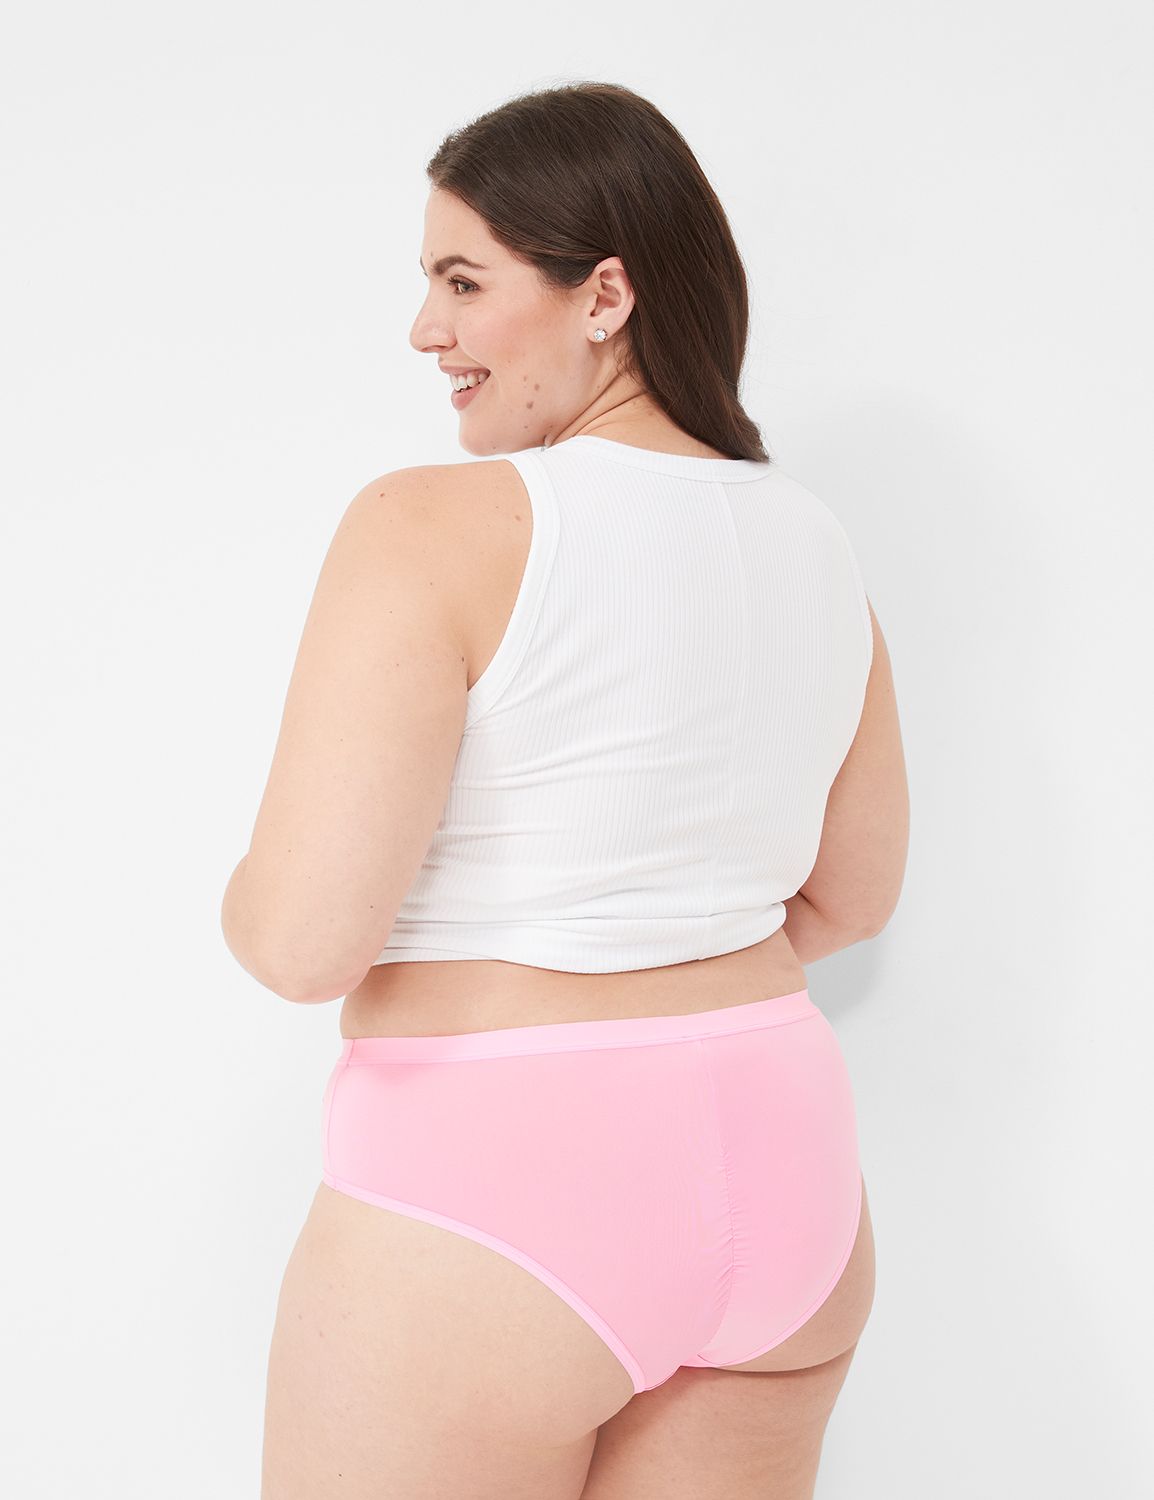 Ruched Panties, Shop The Largest Collection